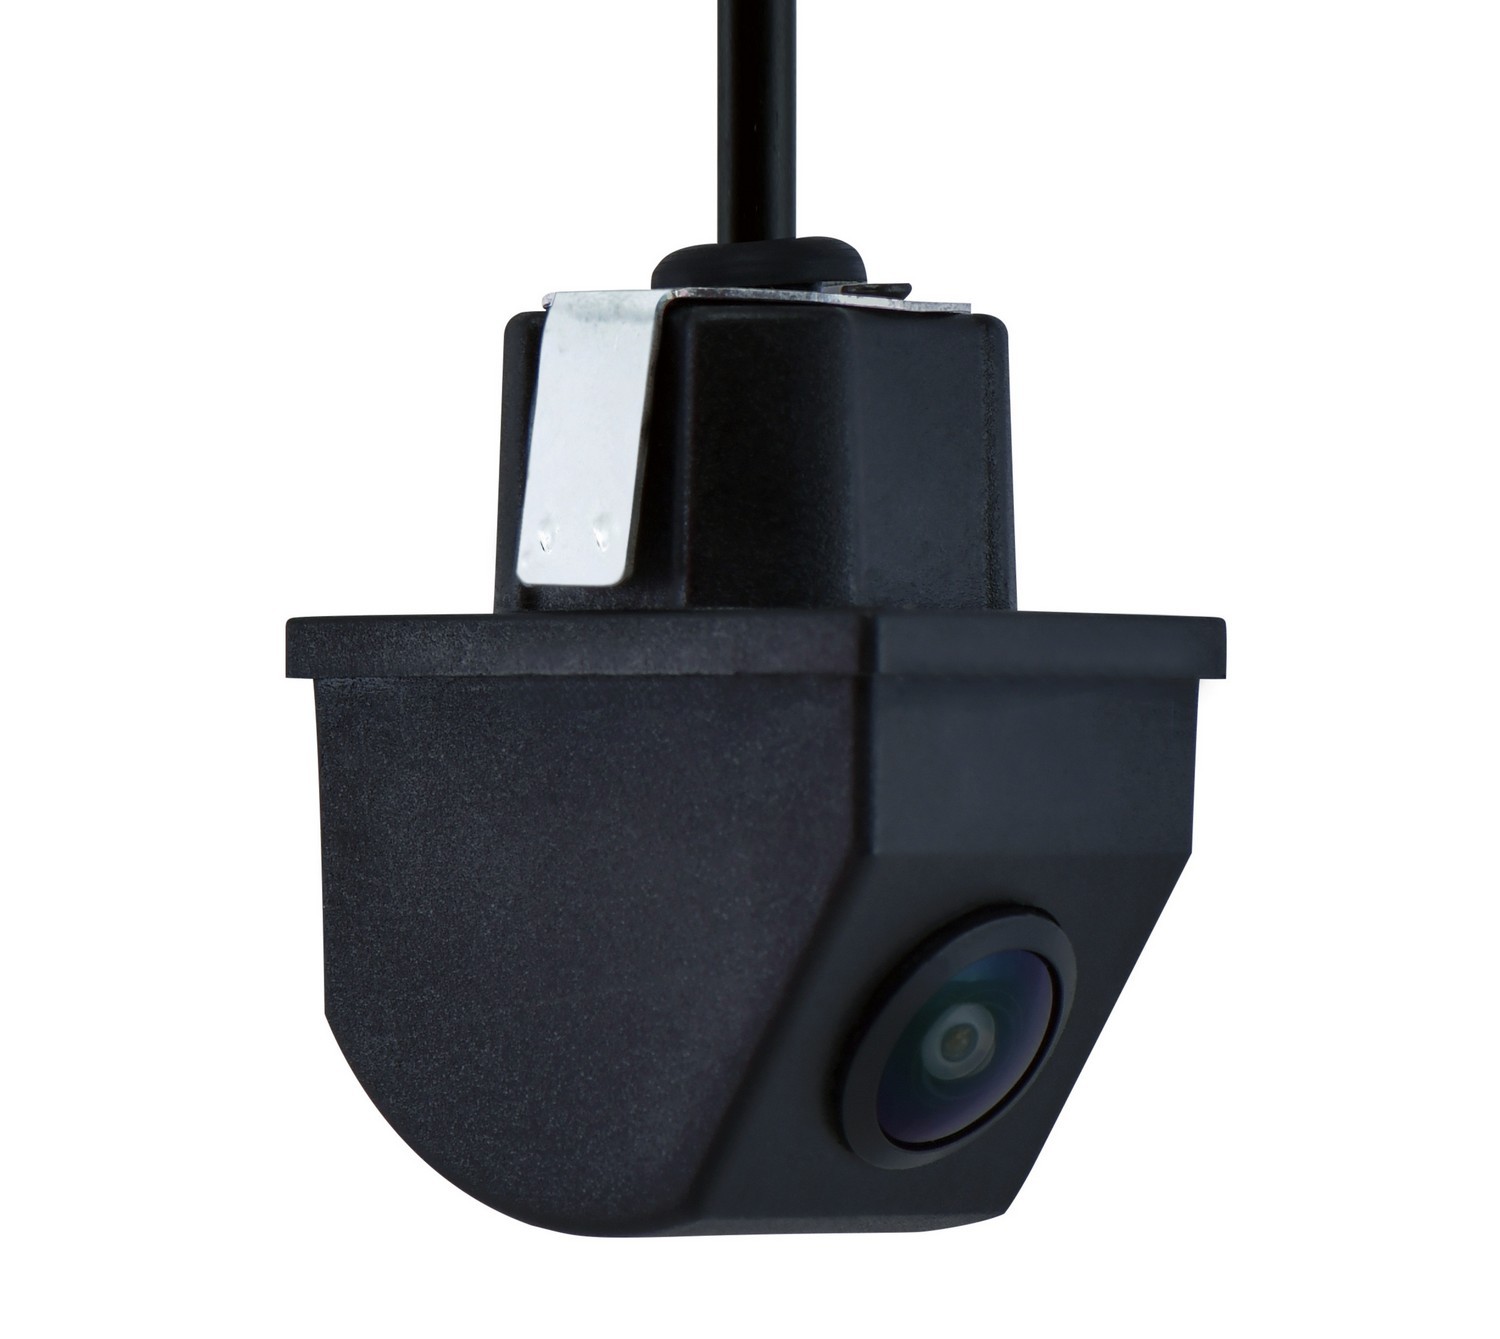 interior camera for the van HD with WDR